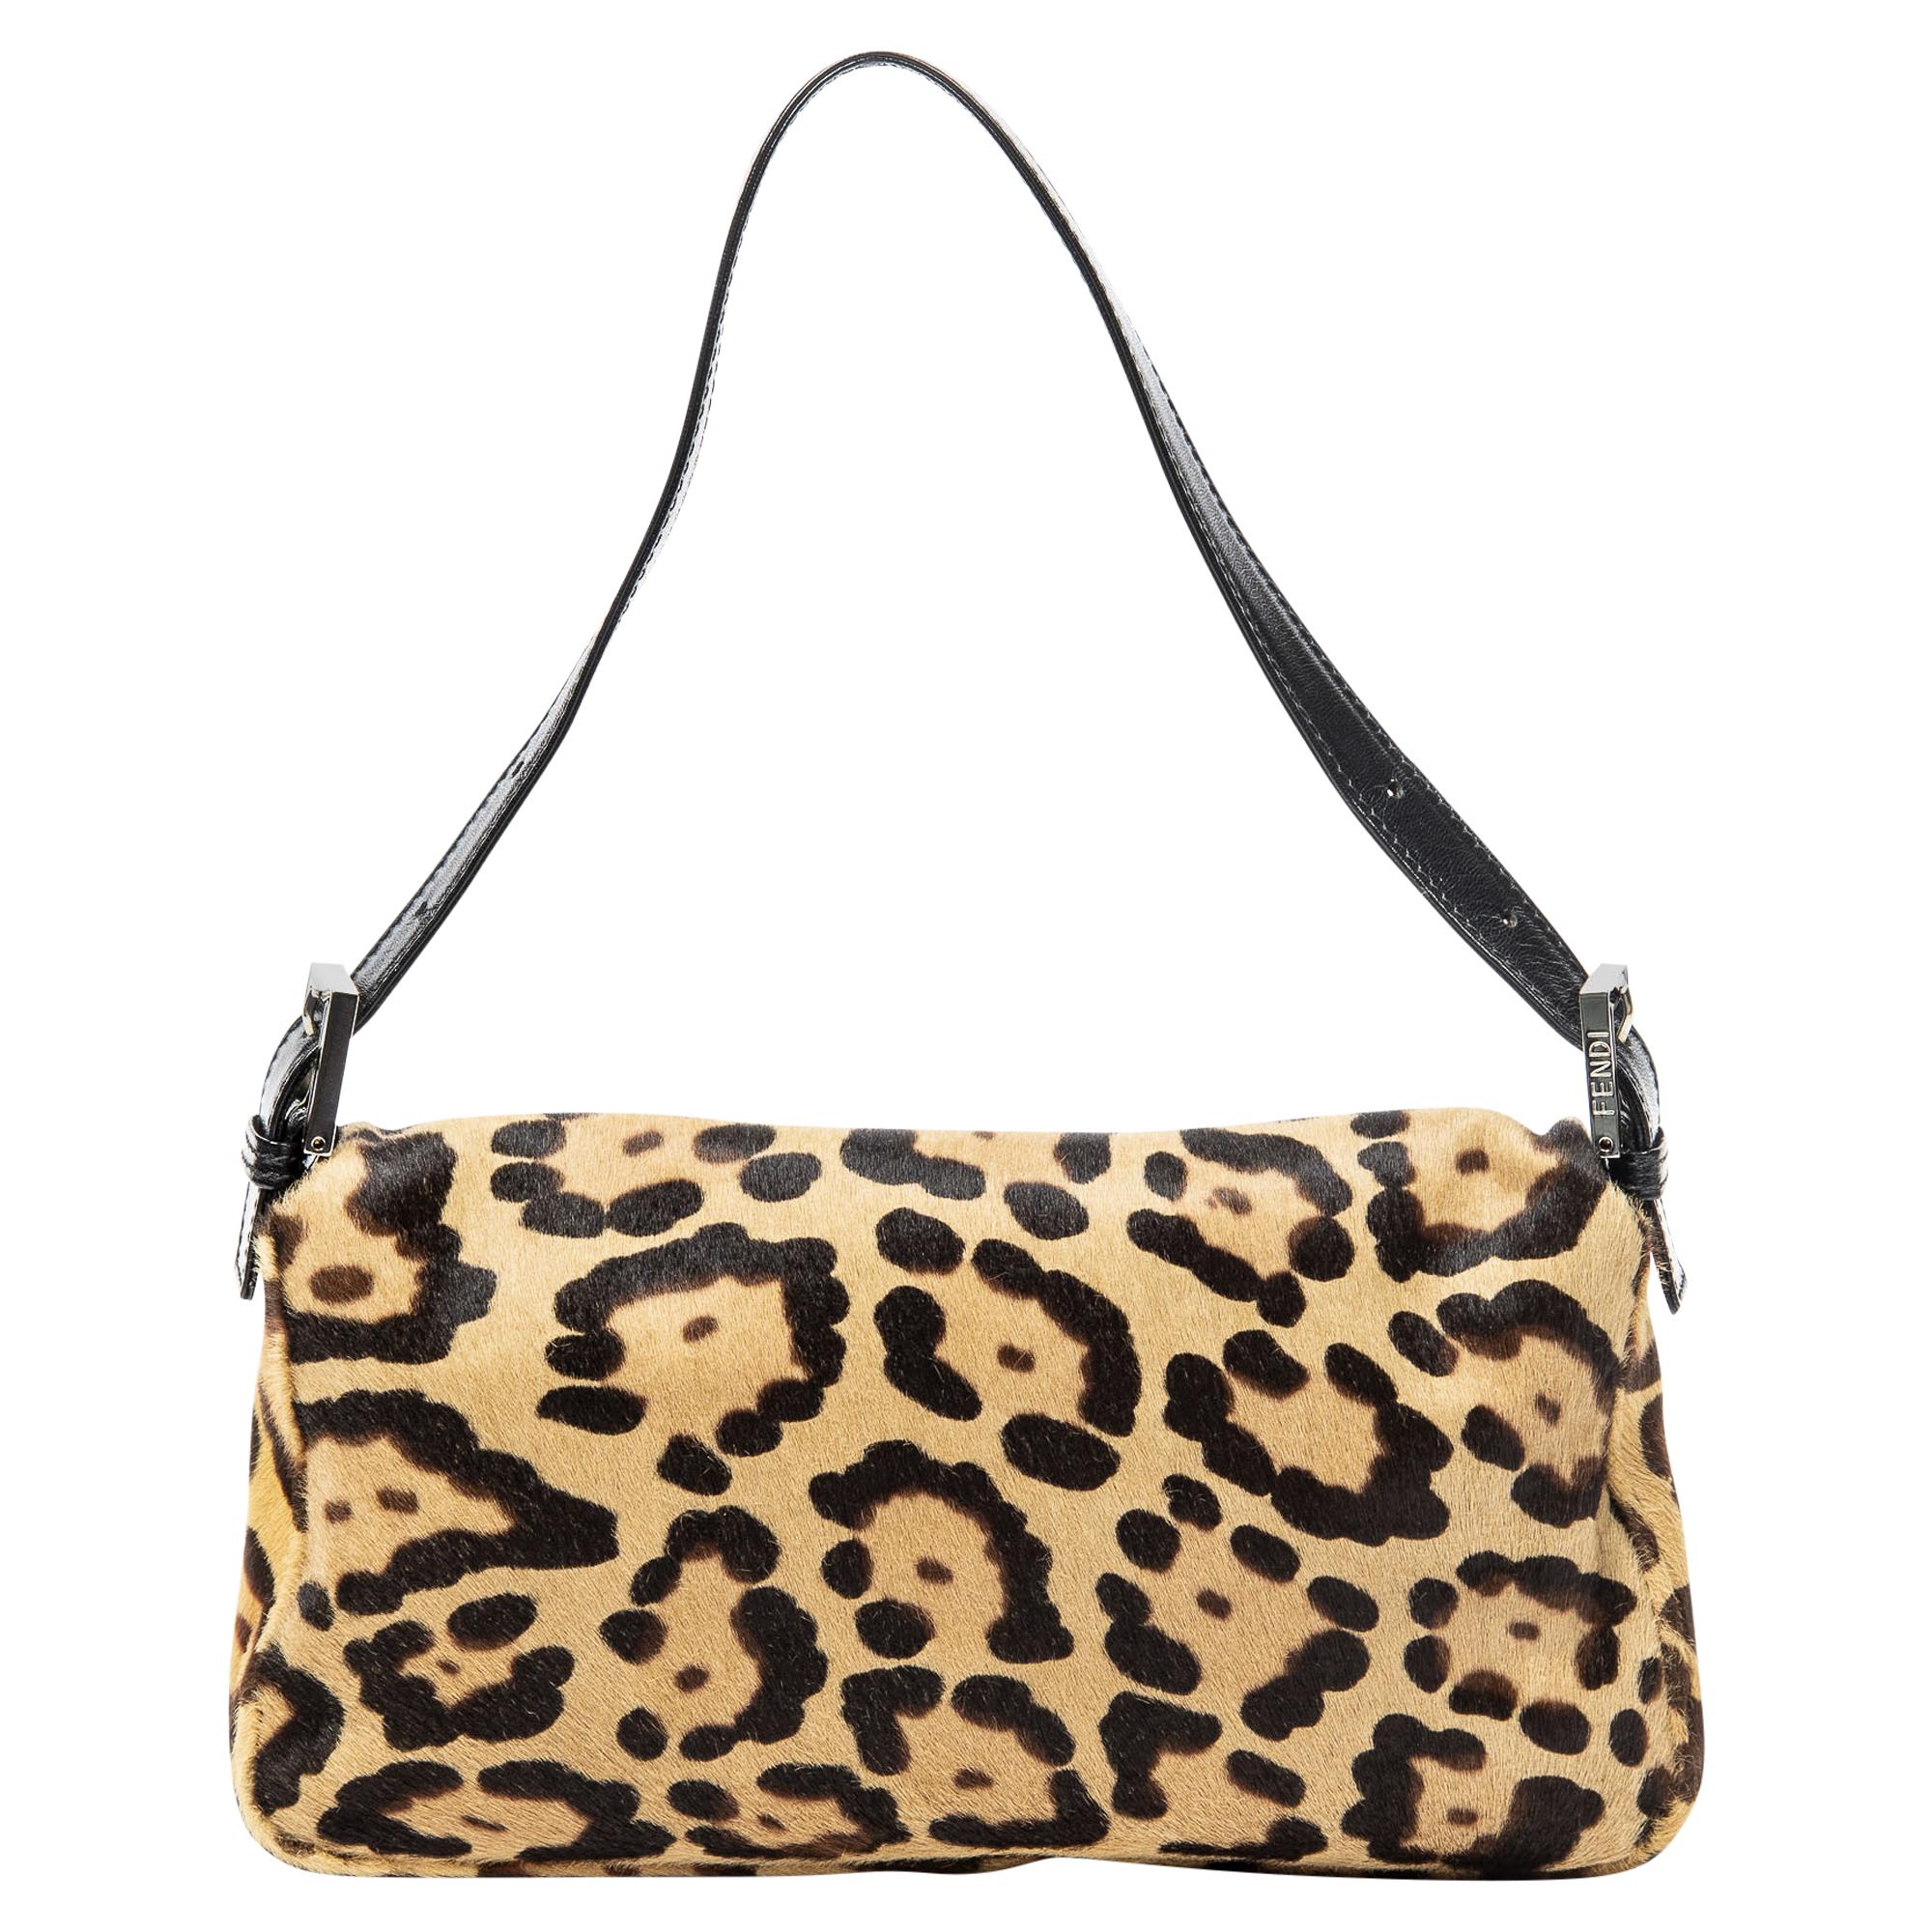 Fendi Limited Edition Leopard Baguette In Excellent Condition For Sale In Atlanta, GA